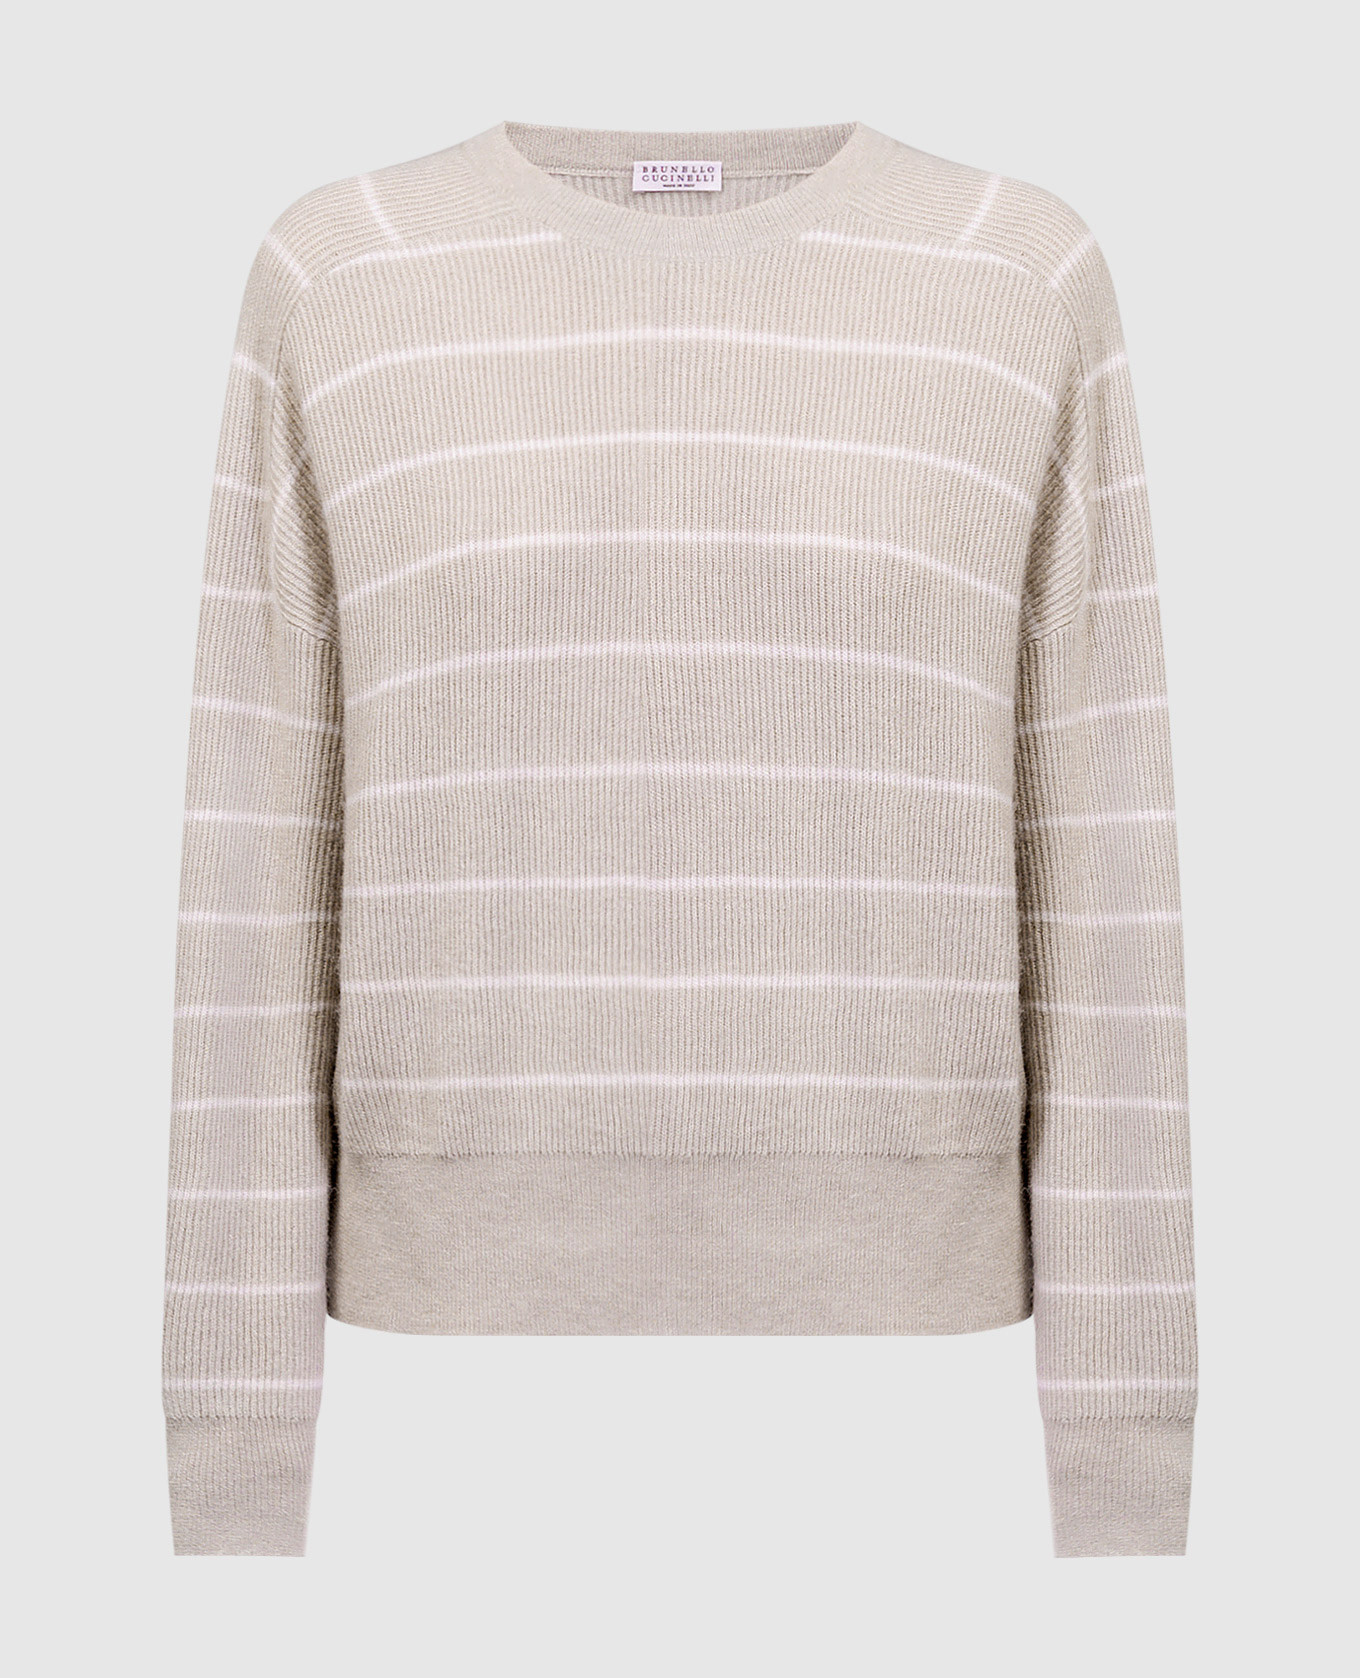 Gray striped sweater with monil chain